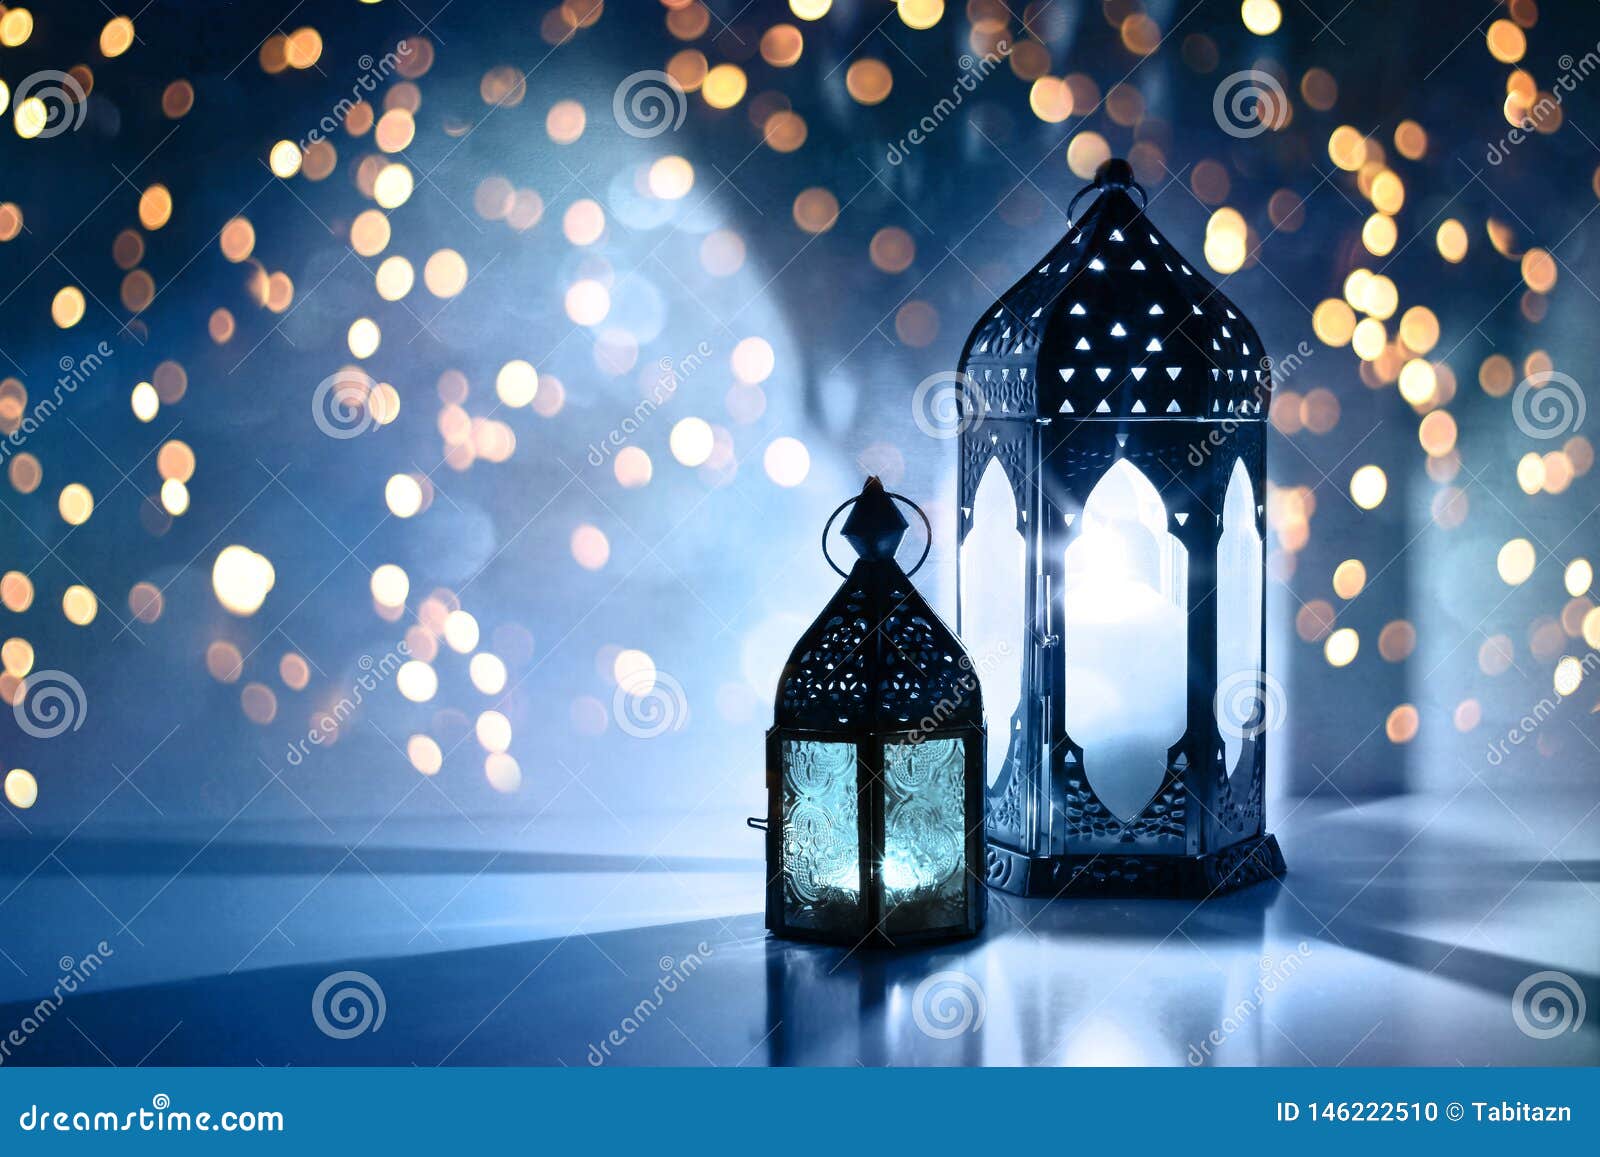 couple of glowing moroccan ornamental lanterns on the table. greeting card, invitation for muslim holy month ramadan